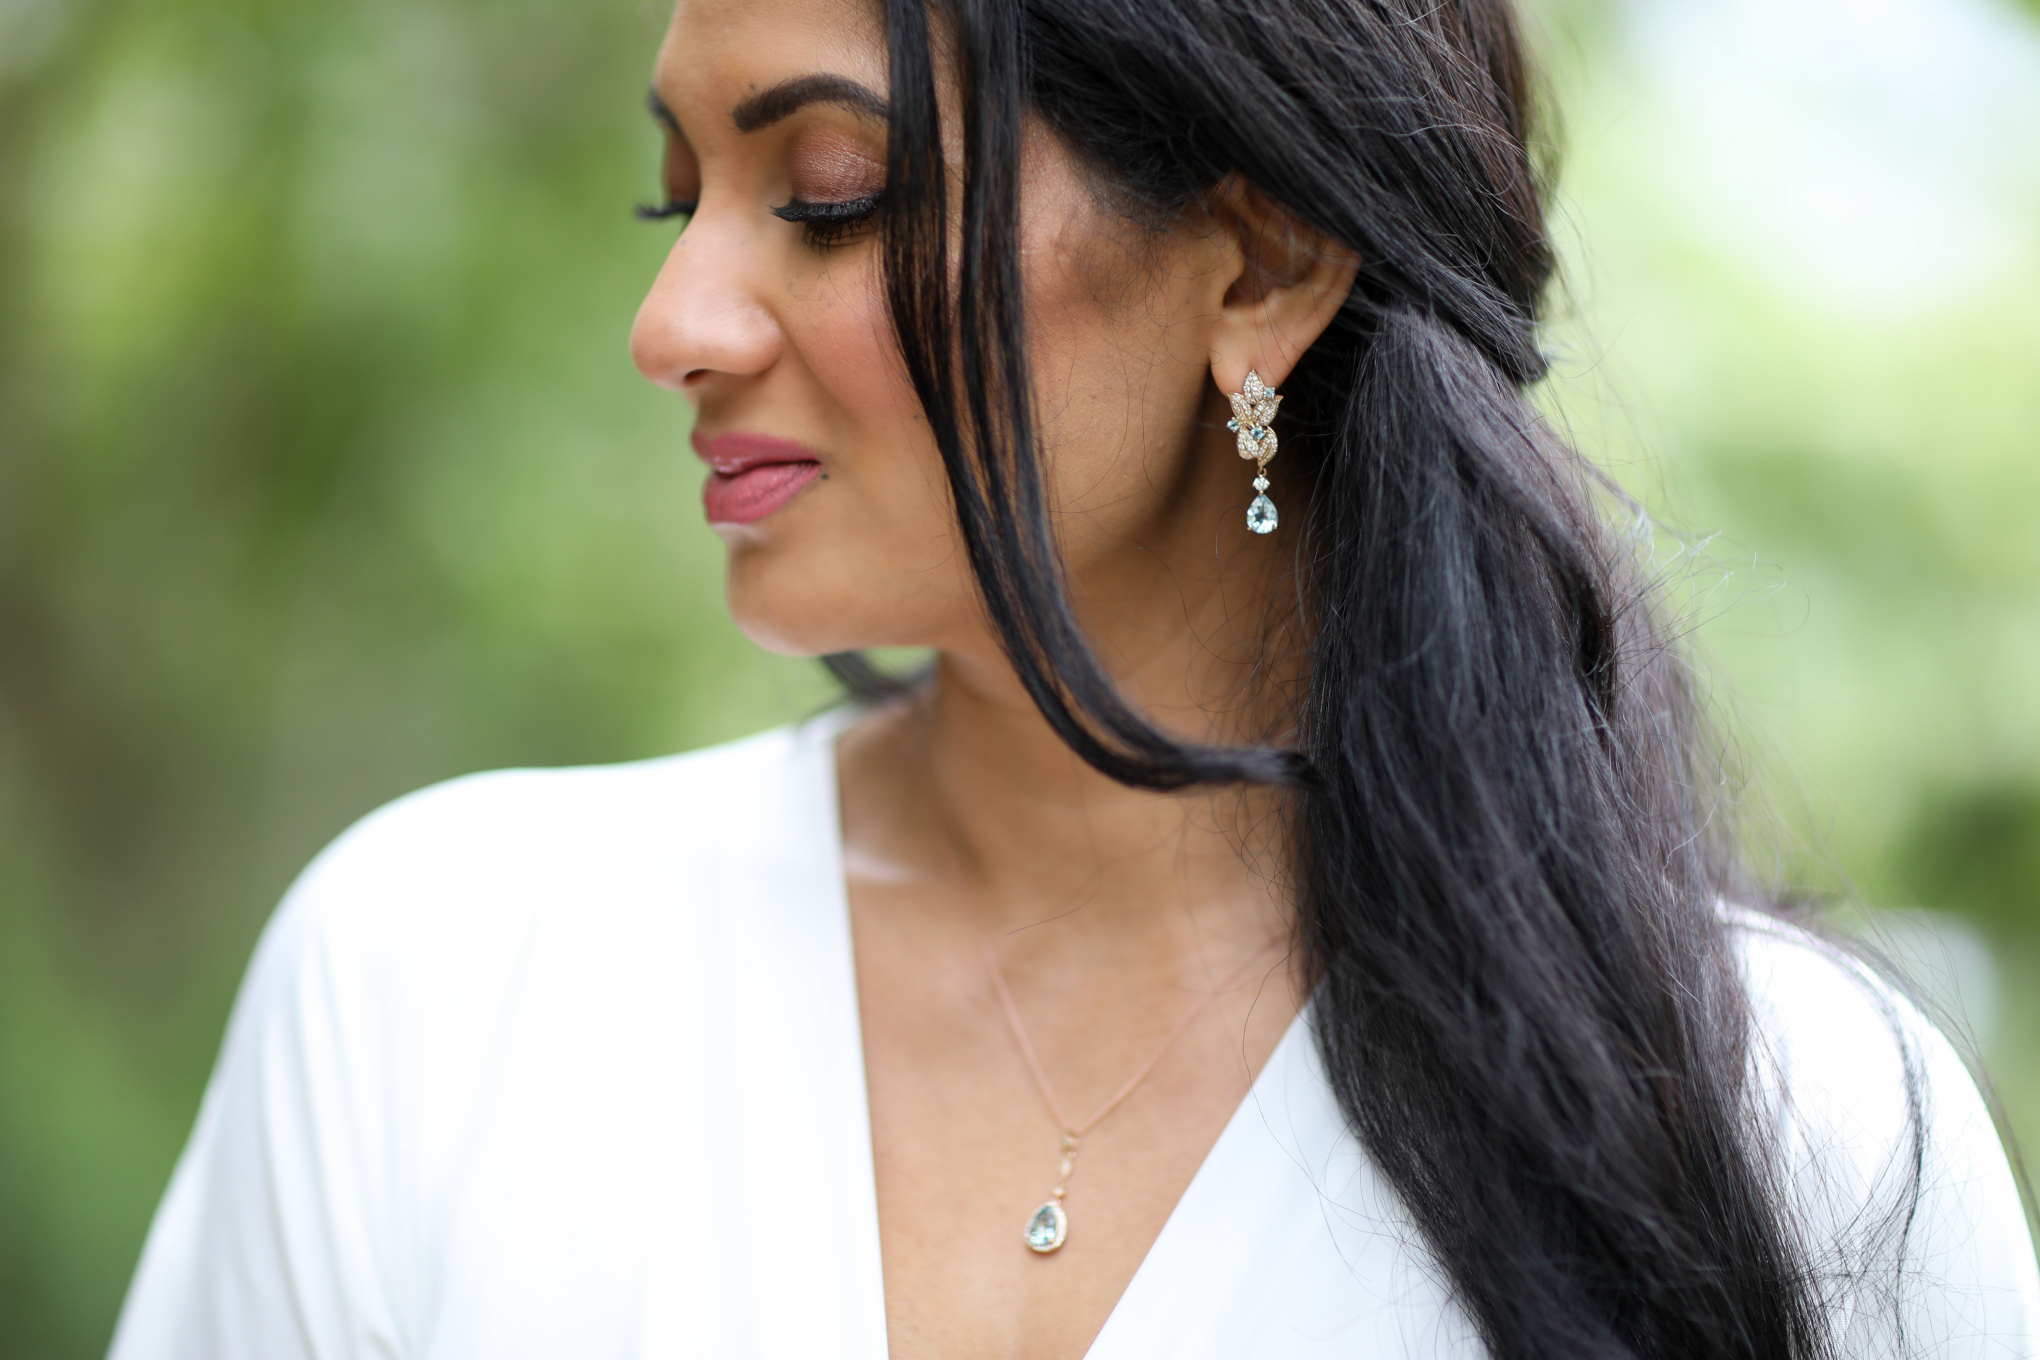 Looking for the perfect mother's day gift? Orange County Blogger Debbie Savage is sharing her favorite Mother's Day gift ideas with angara jewelry here!